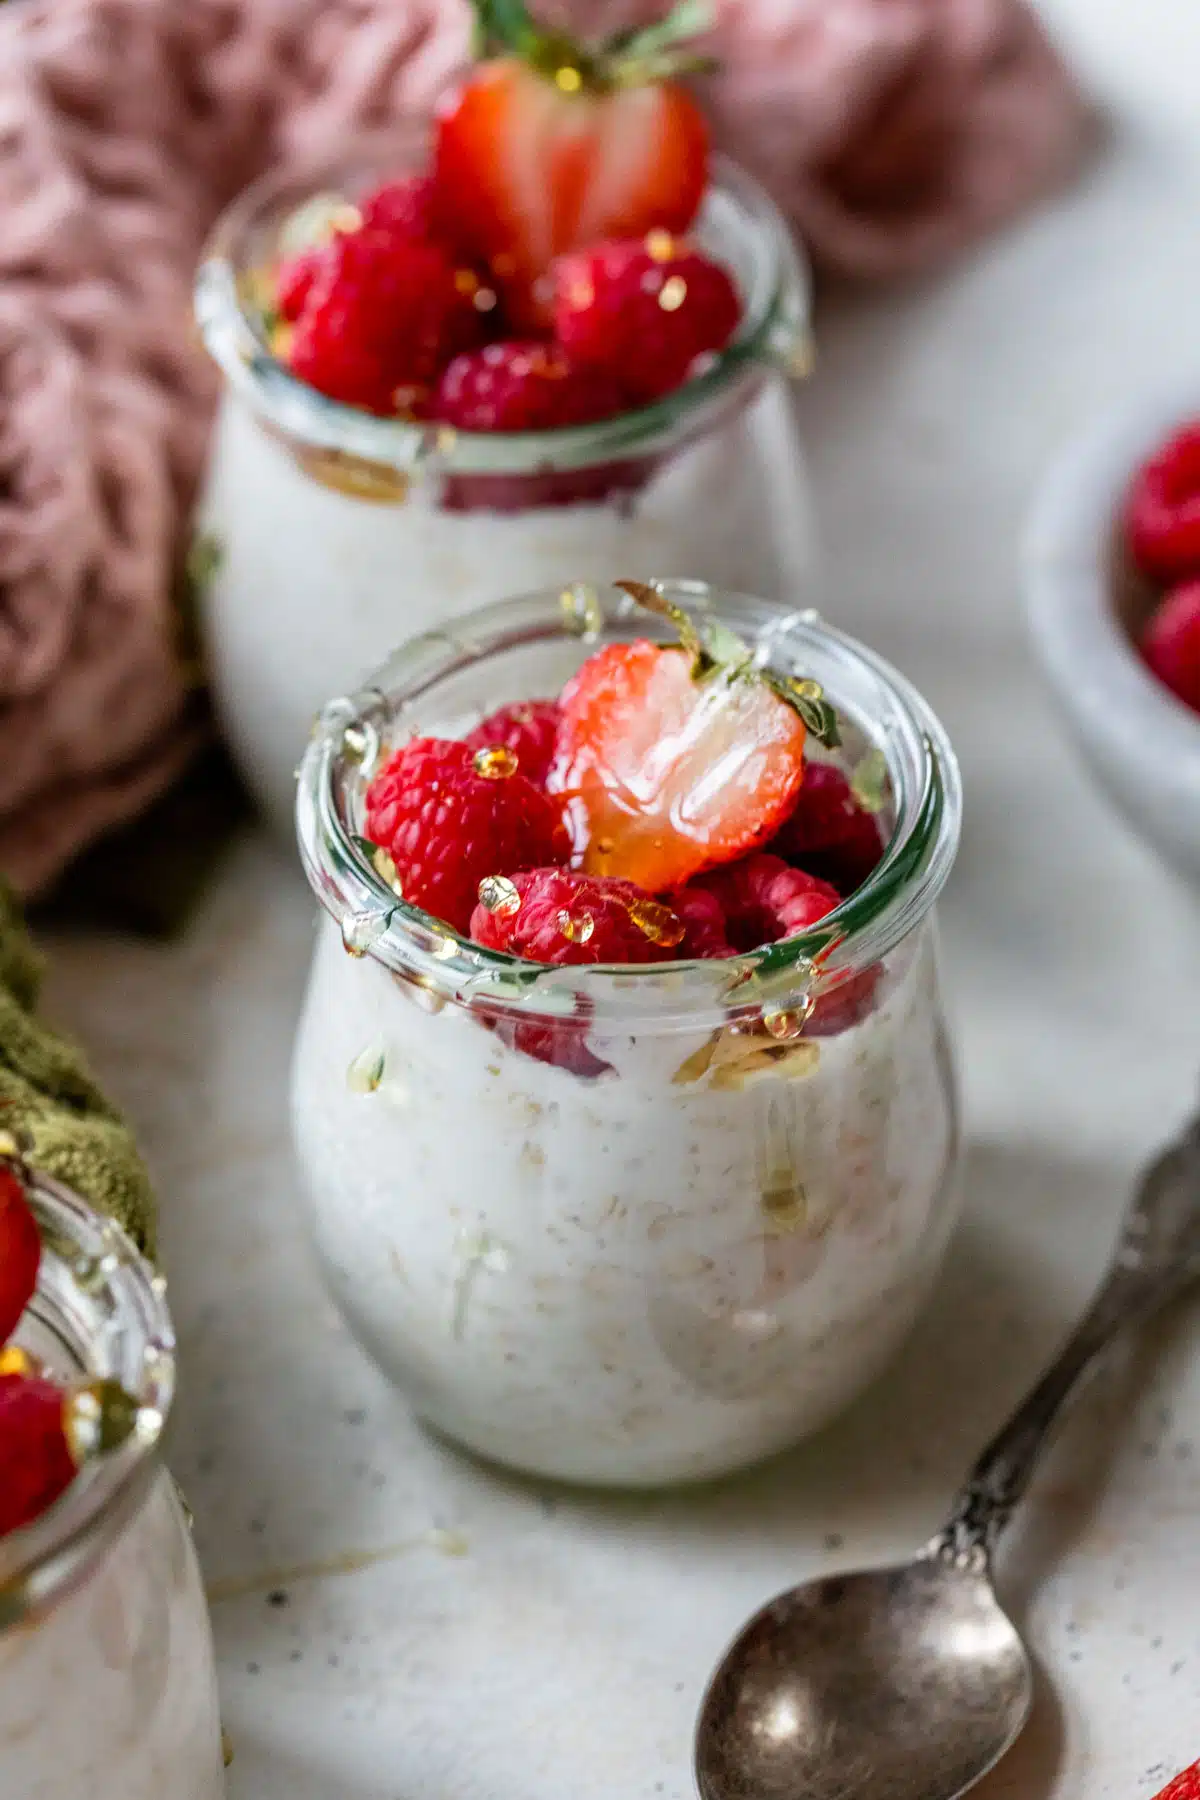 overnight oats in a mason jar with raspberries and strawberries on top